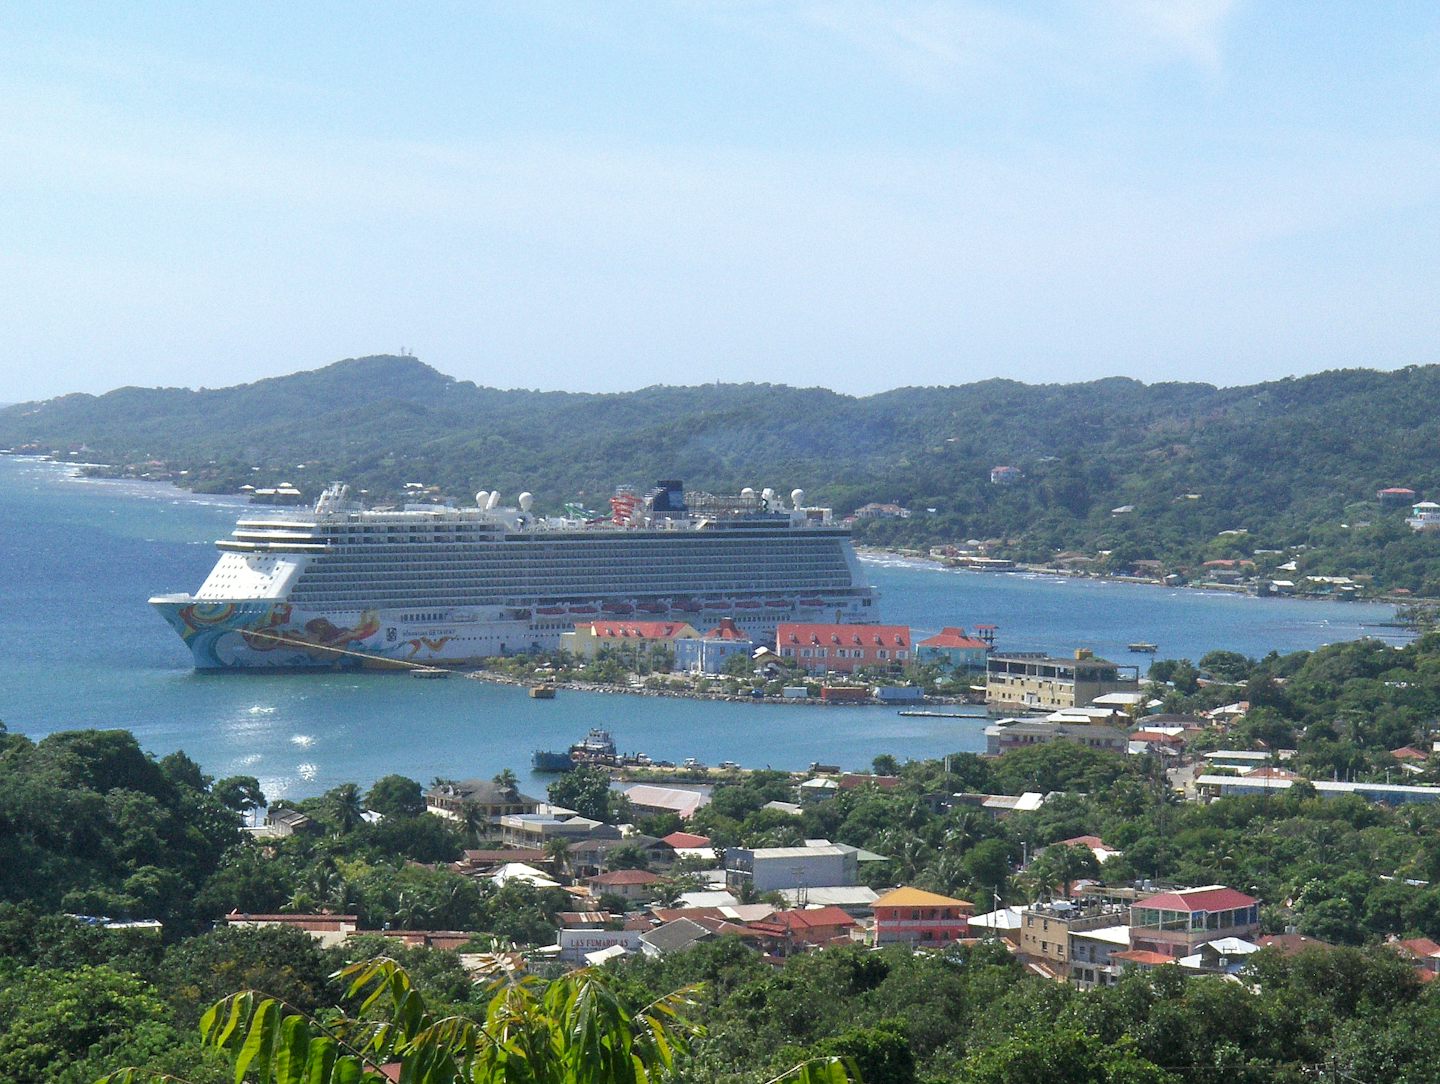 Highest peak of Roatan, with view of Cruise Ship